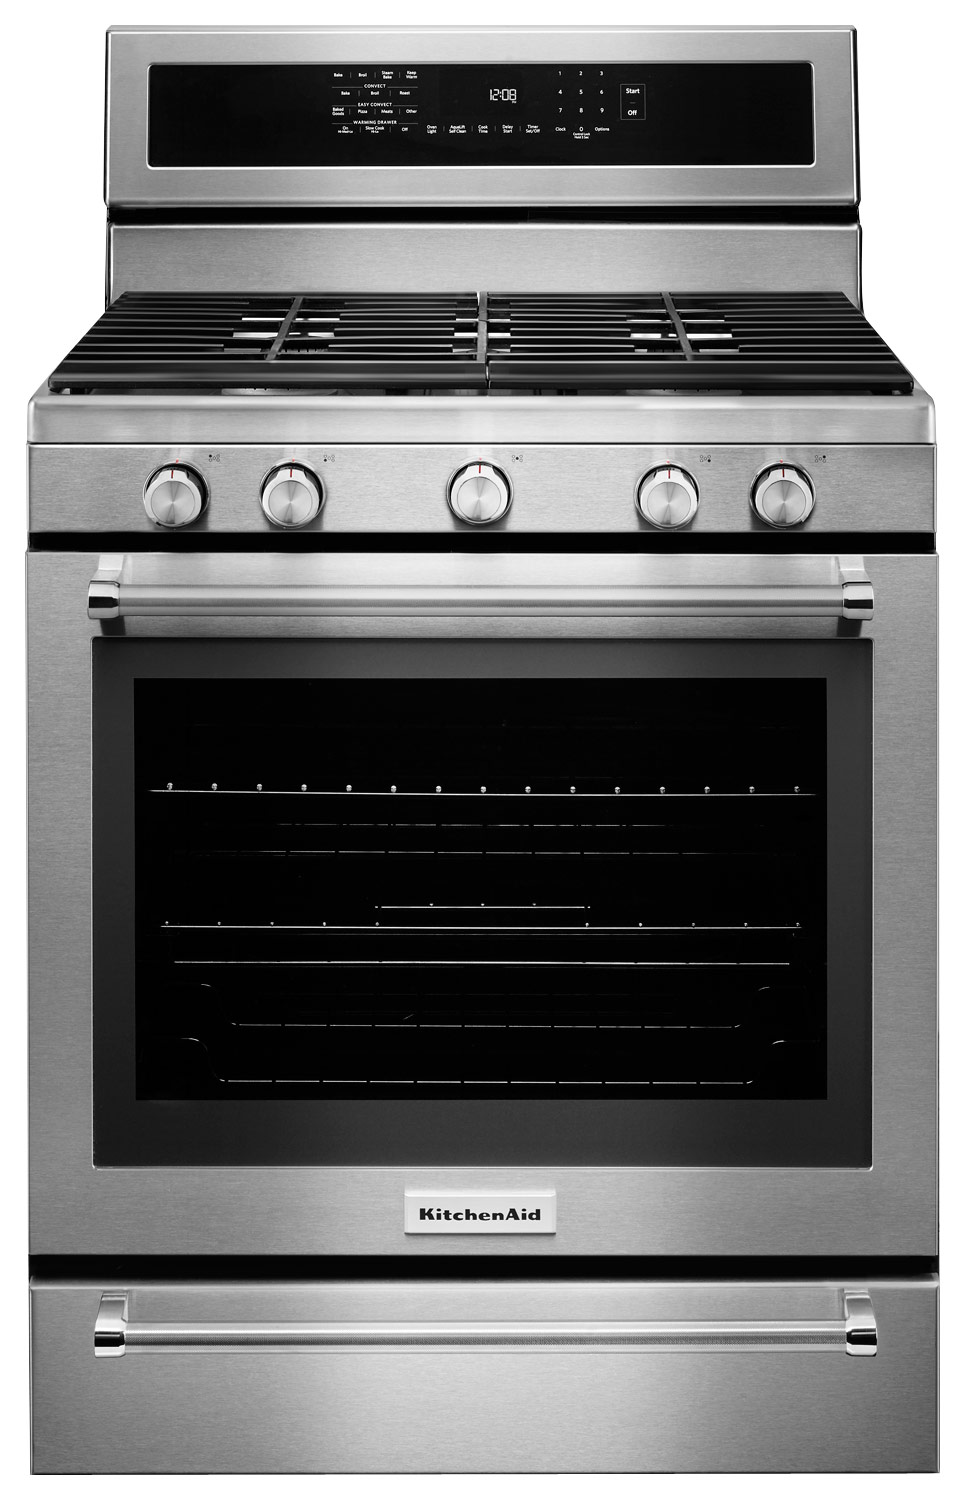 Cooking with Precision: Unveiling the Features of the KitchenAid KFGG500E Gas Range